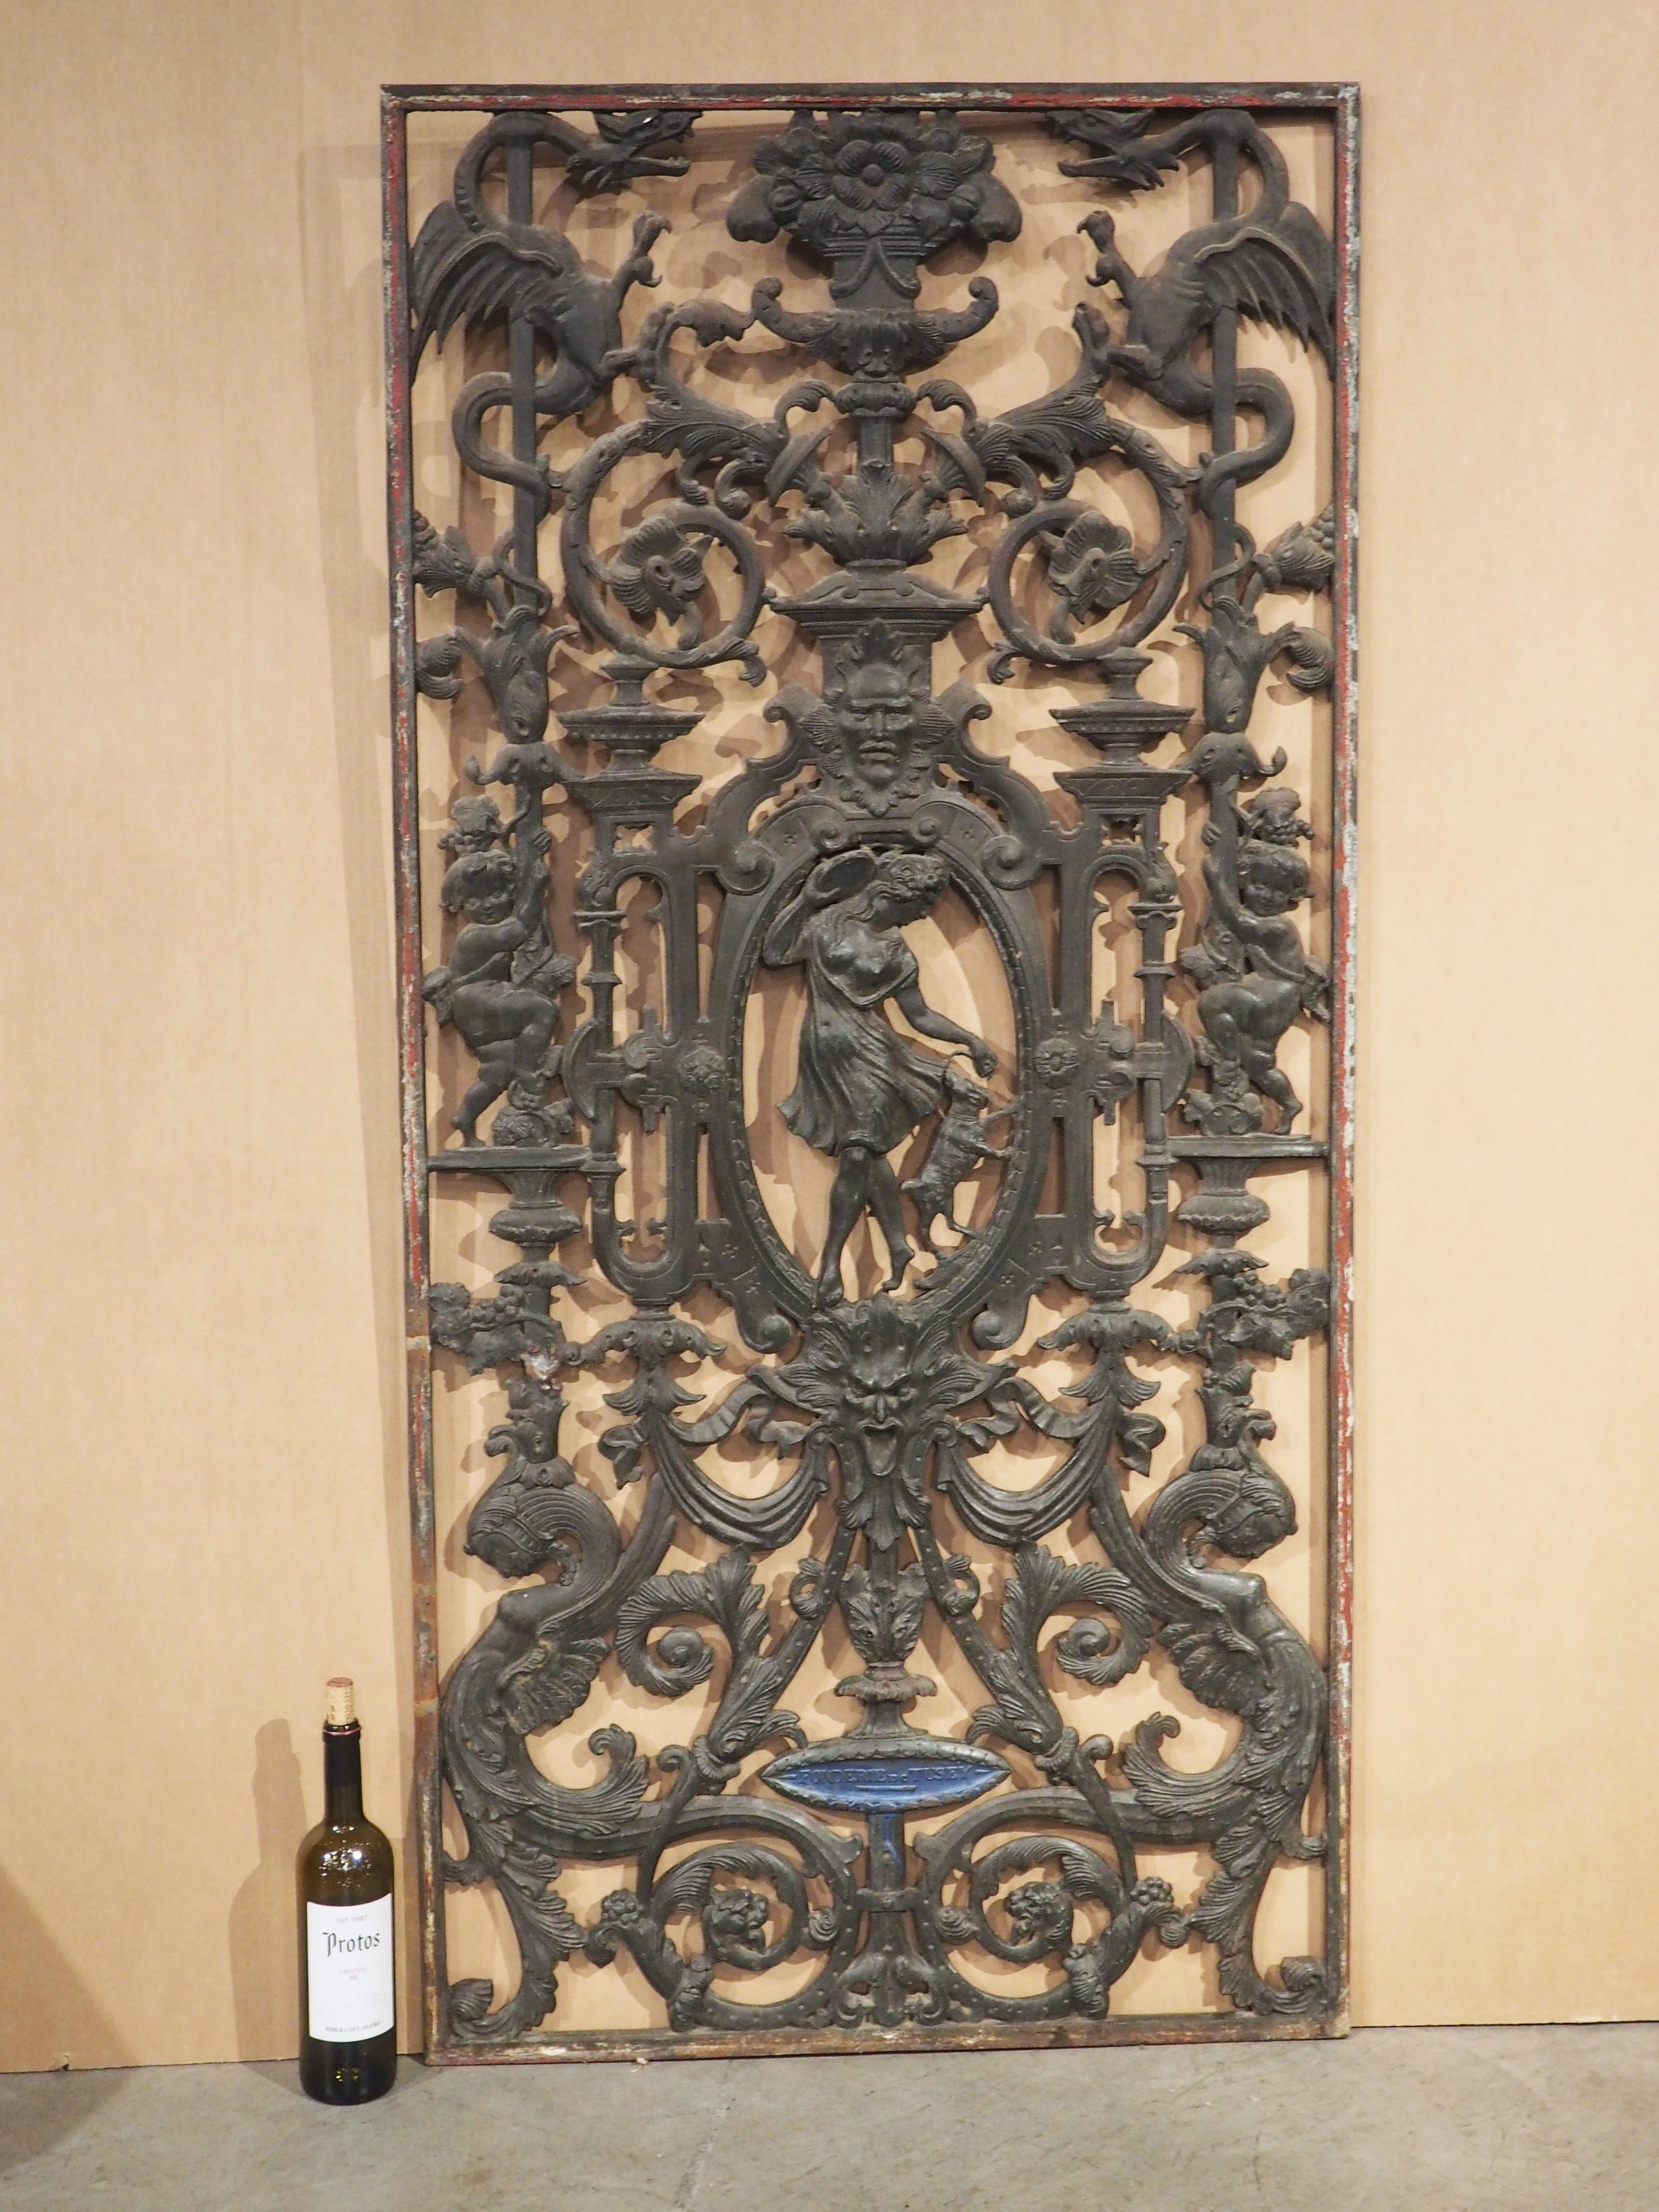 Cast in the 1800s by the well-known French iron foundry, La Fonderie de Tusey, this painted iron gate is comprised of an intricate network of flowers, scrolls, and architecture dotted with mythological figures and mascarons. Detailing can be seen on